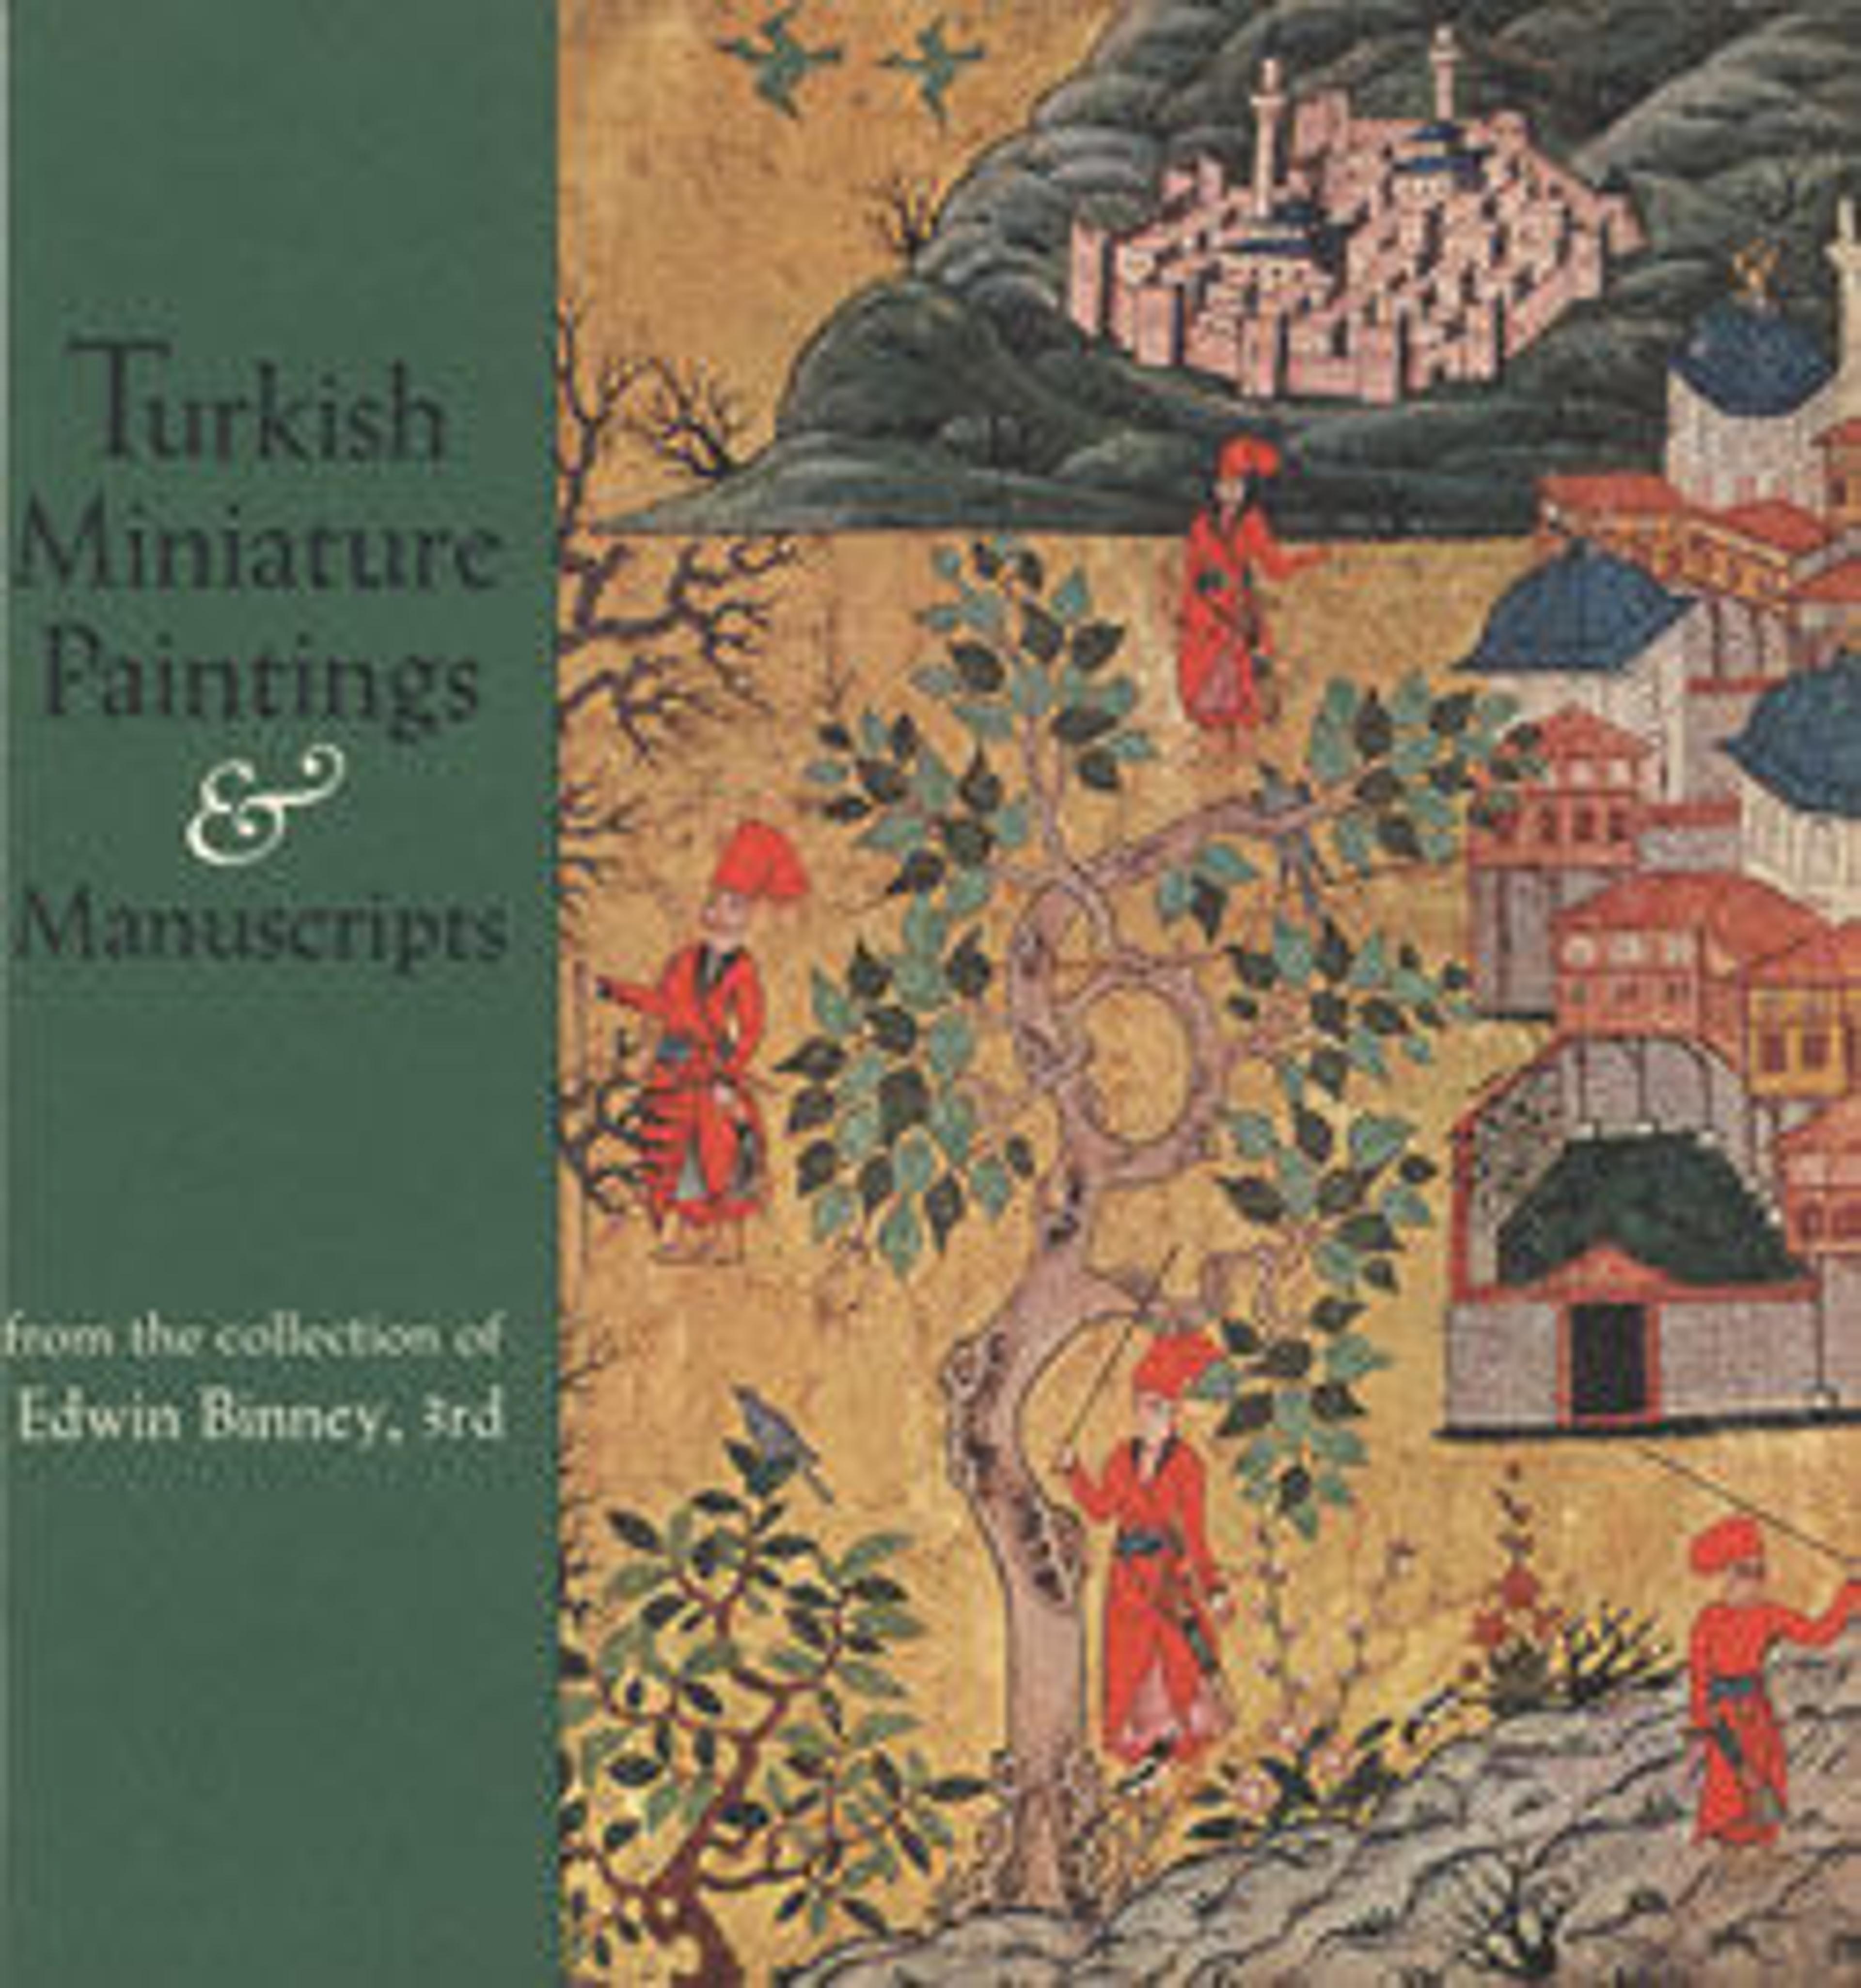 Turkish Miniature Paintings and Manuscripts from the Collection of Edwin Binney, 3rd